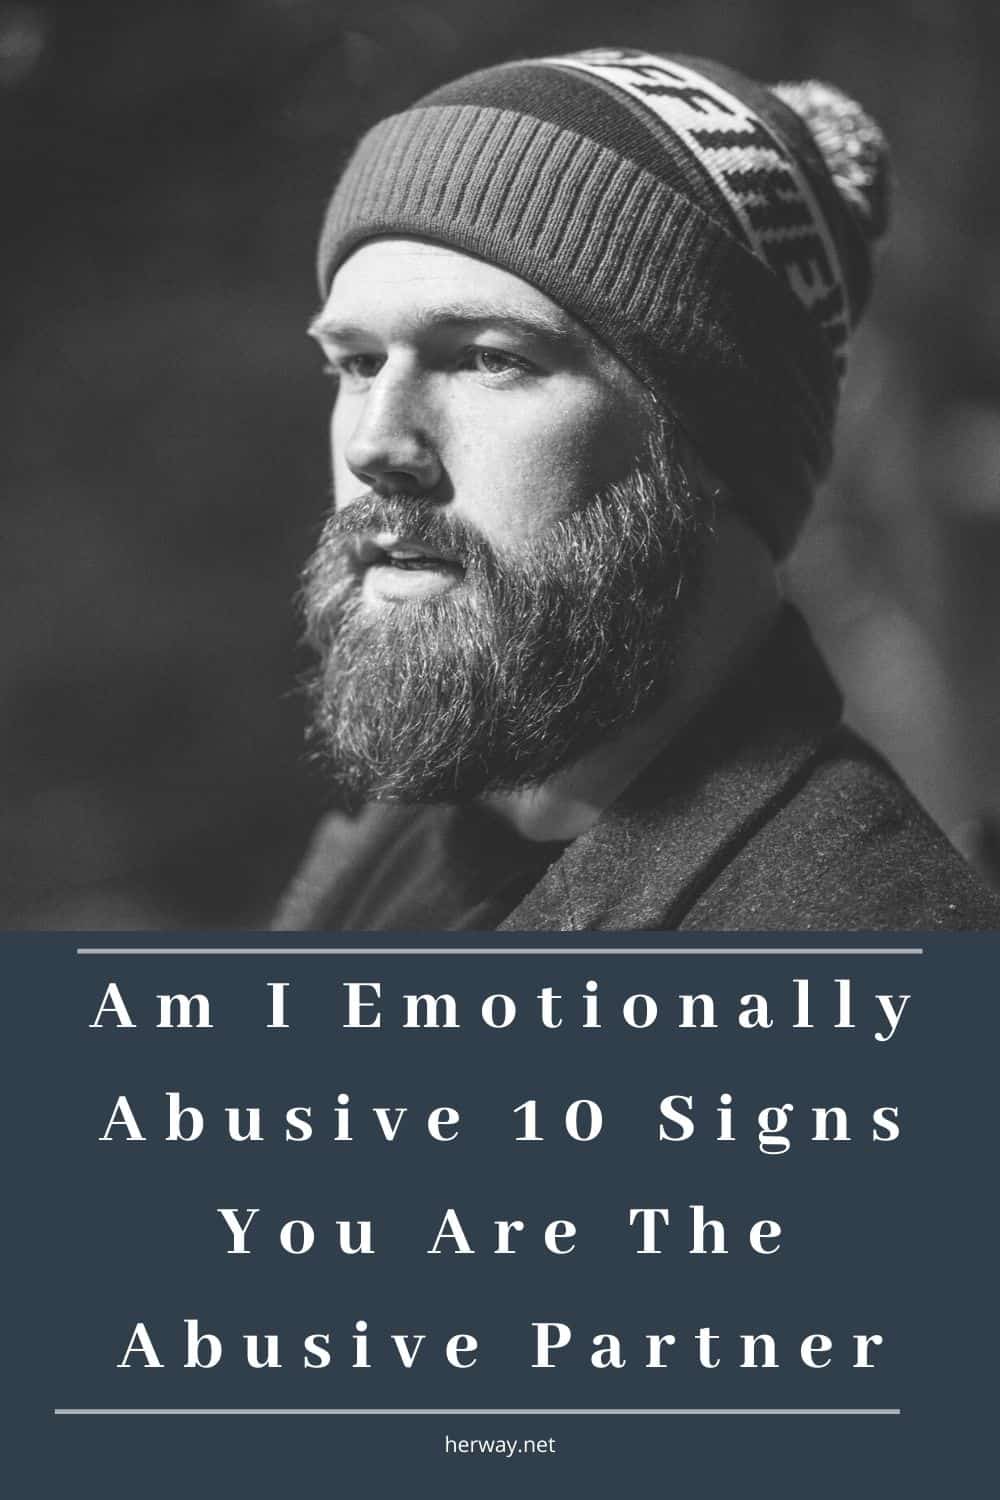 Am I Emotionally Abusive 10 Signs You Are The Abusive Partner